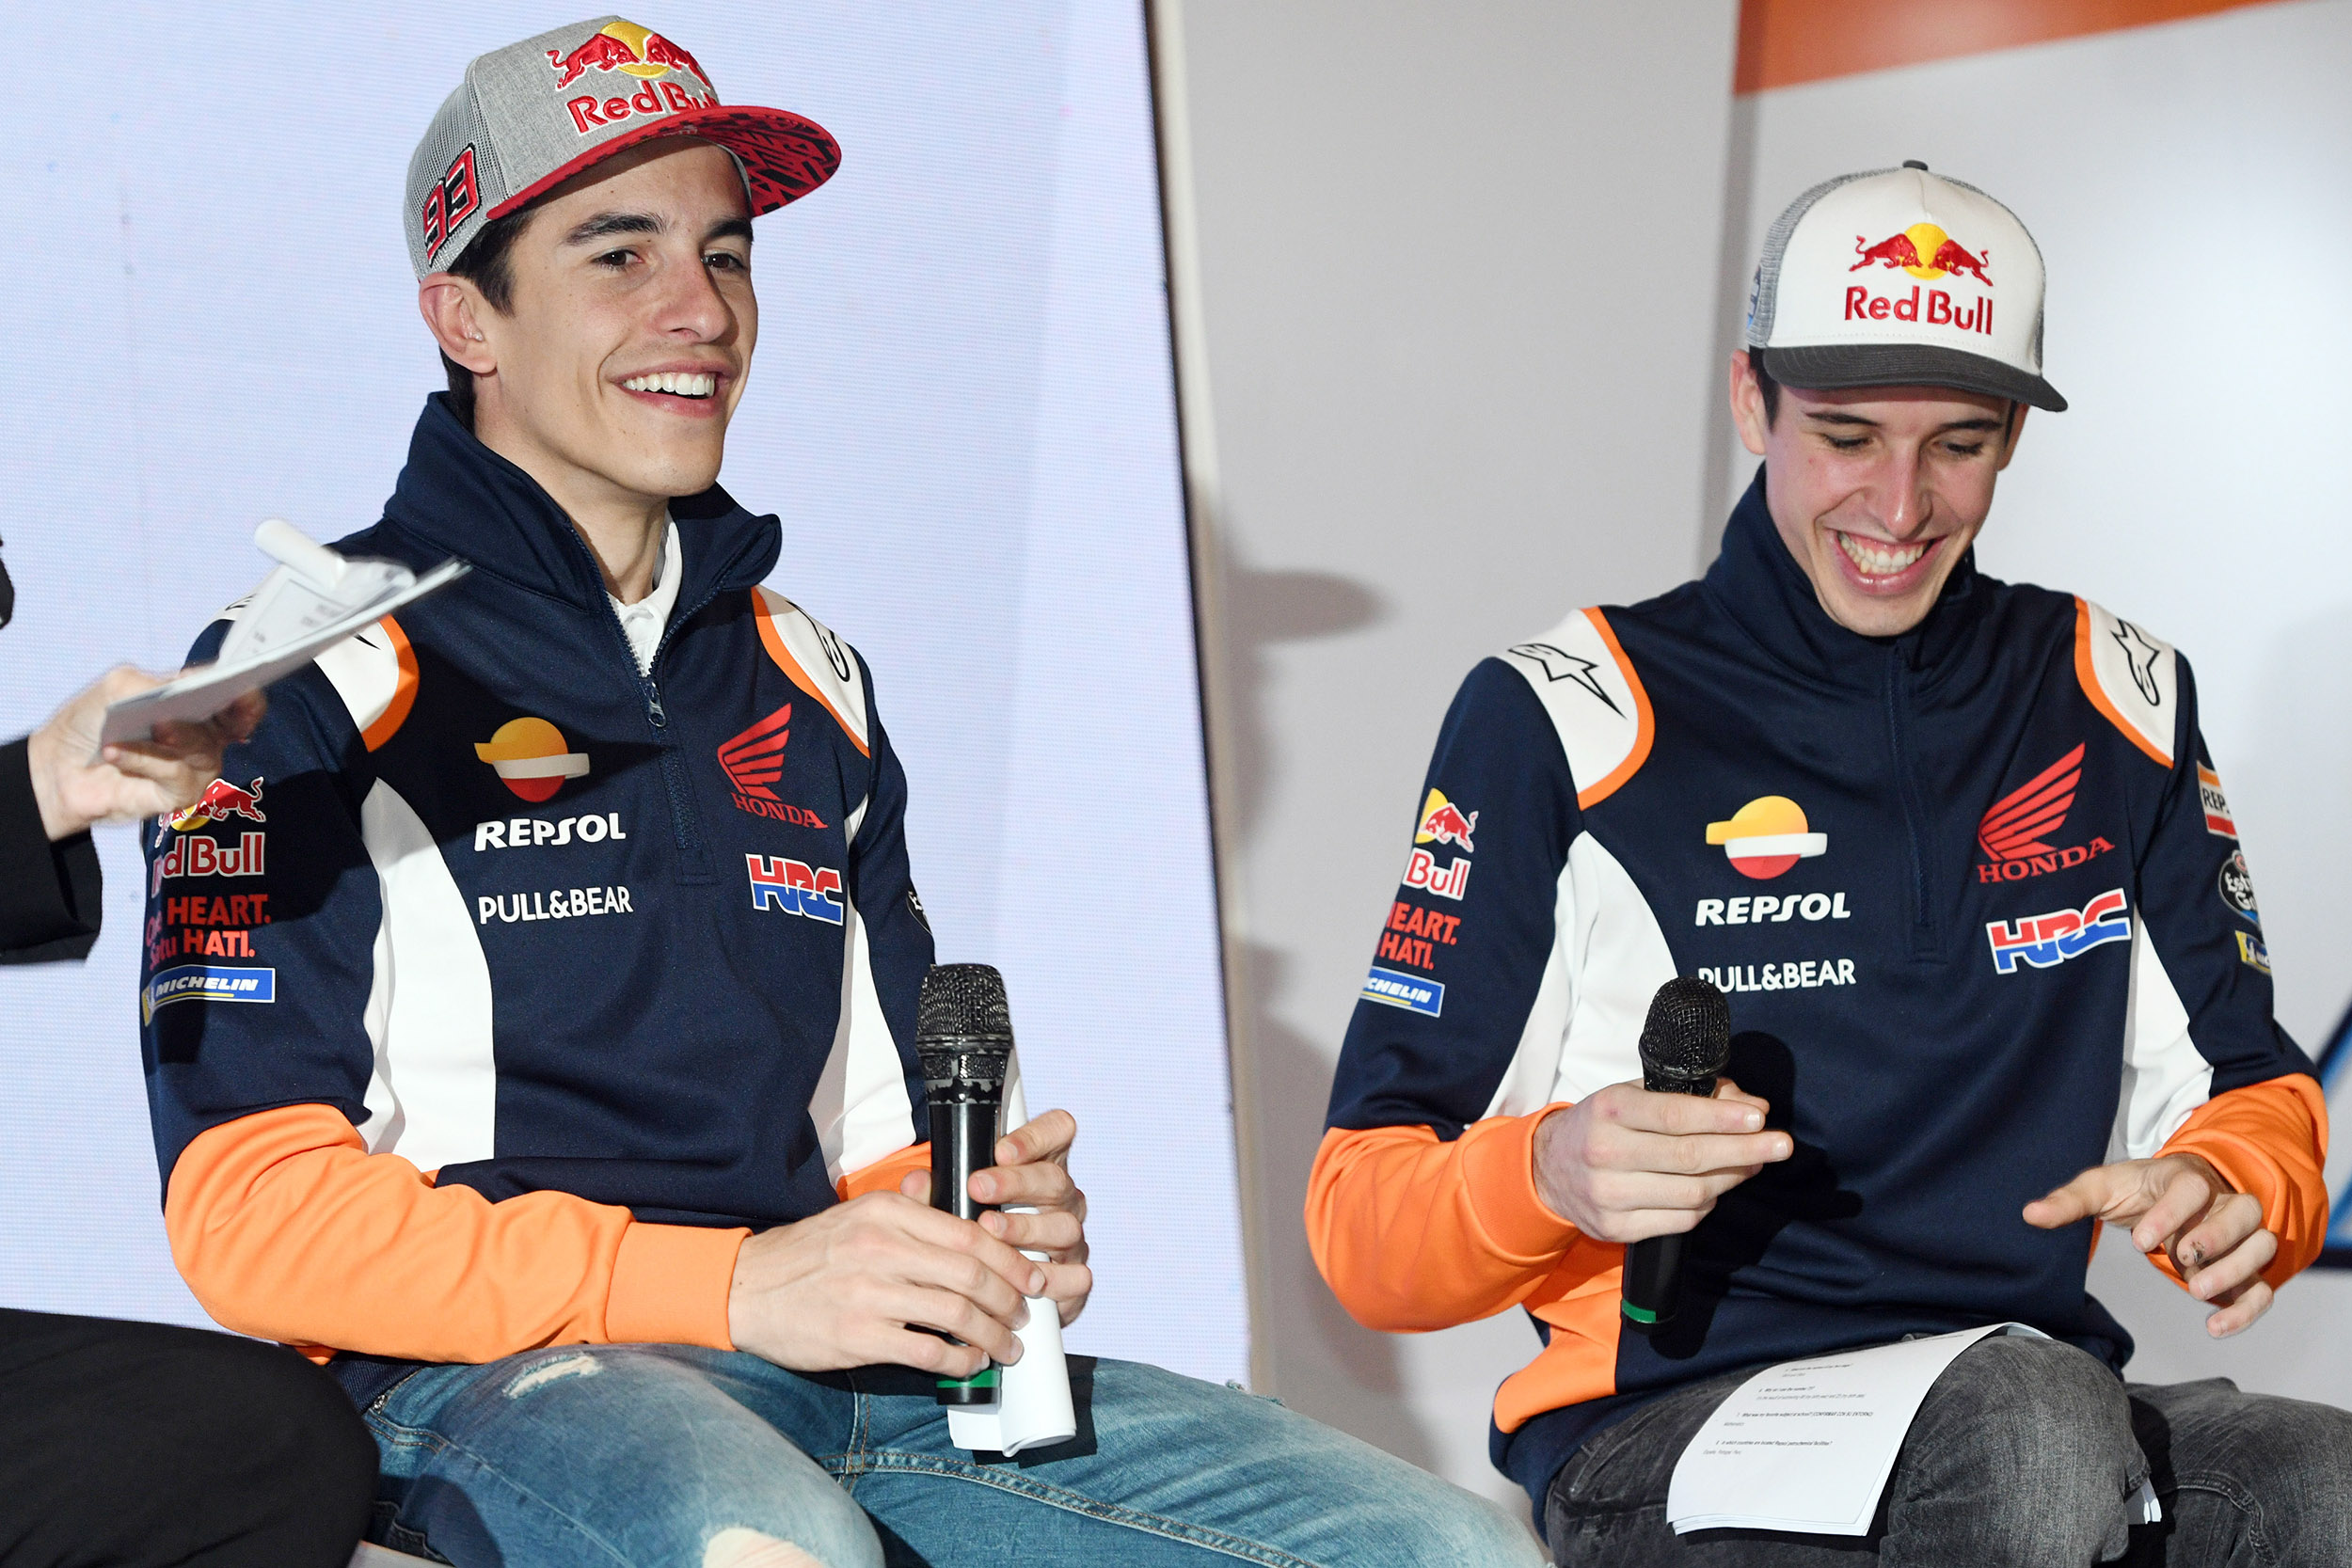 Motorcyclists Marc Marquez, left, and his brother Alex Marquez prepare to greet fans during the launch of Repsol oil products in Jakarta, Indonesia, on February 5. 